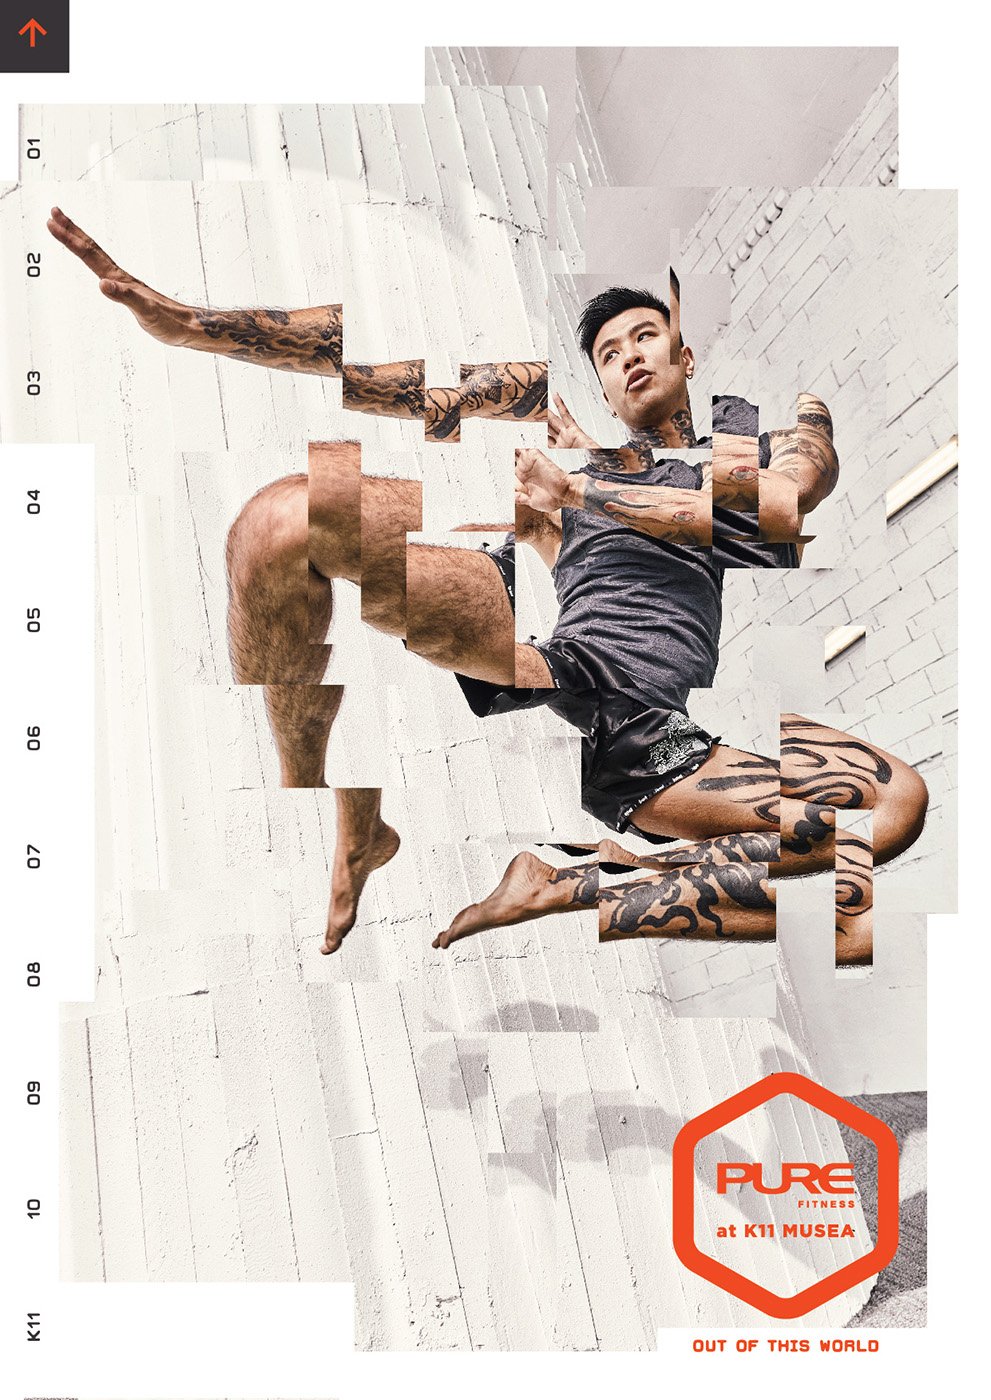 Tear sheet of Pure Fitness campaign shot by Gareth Brown